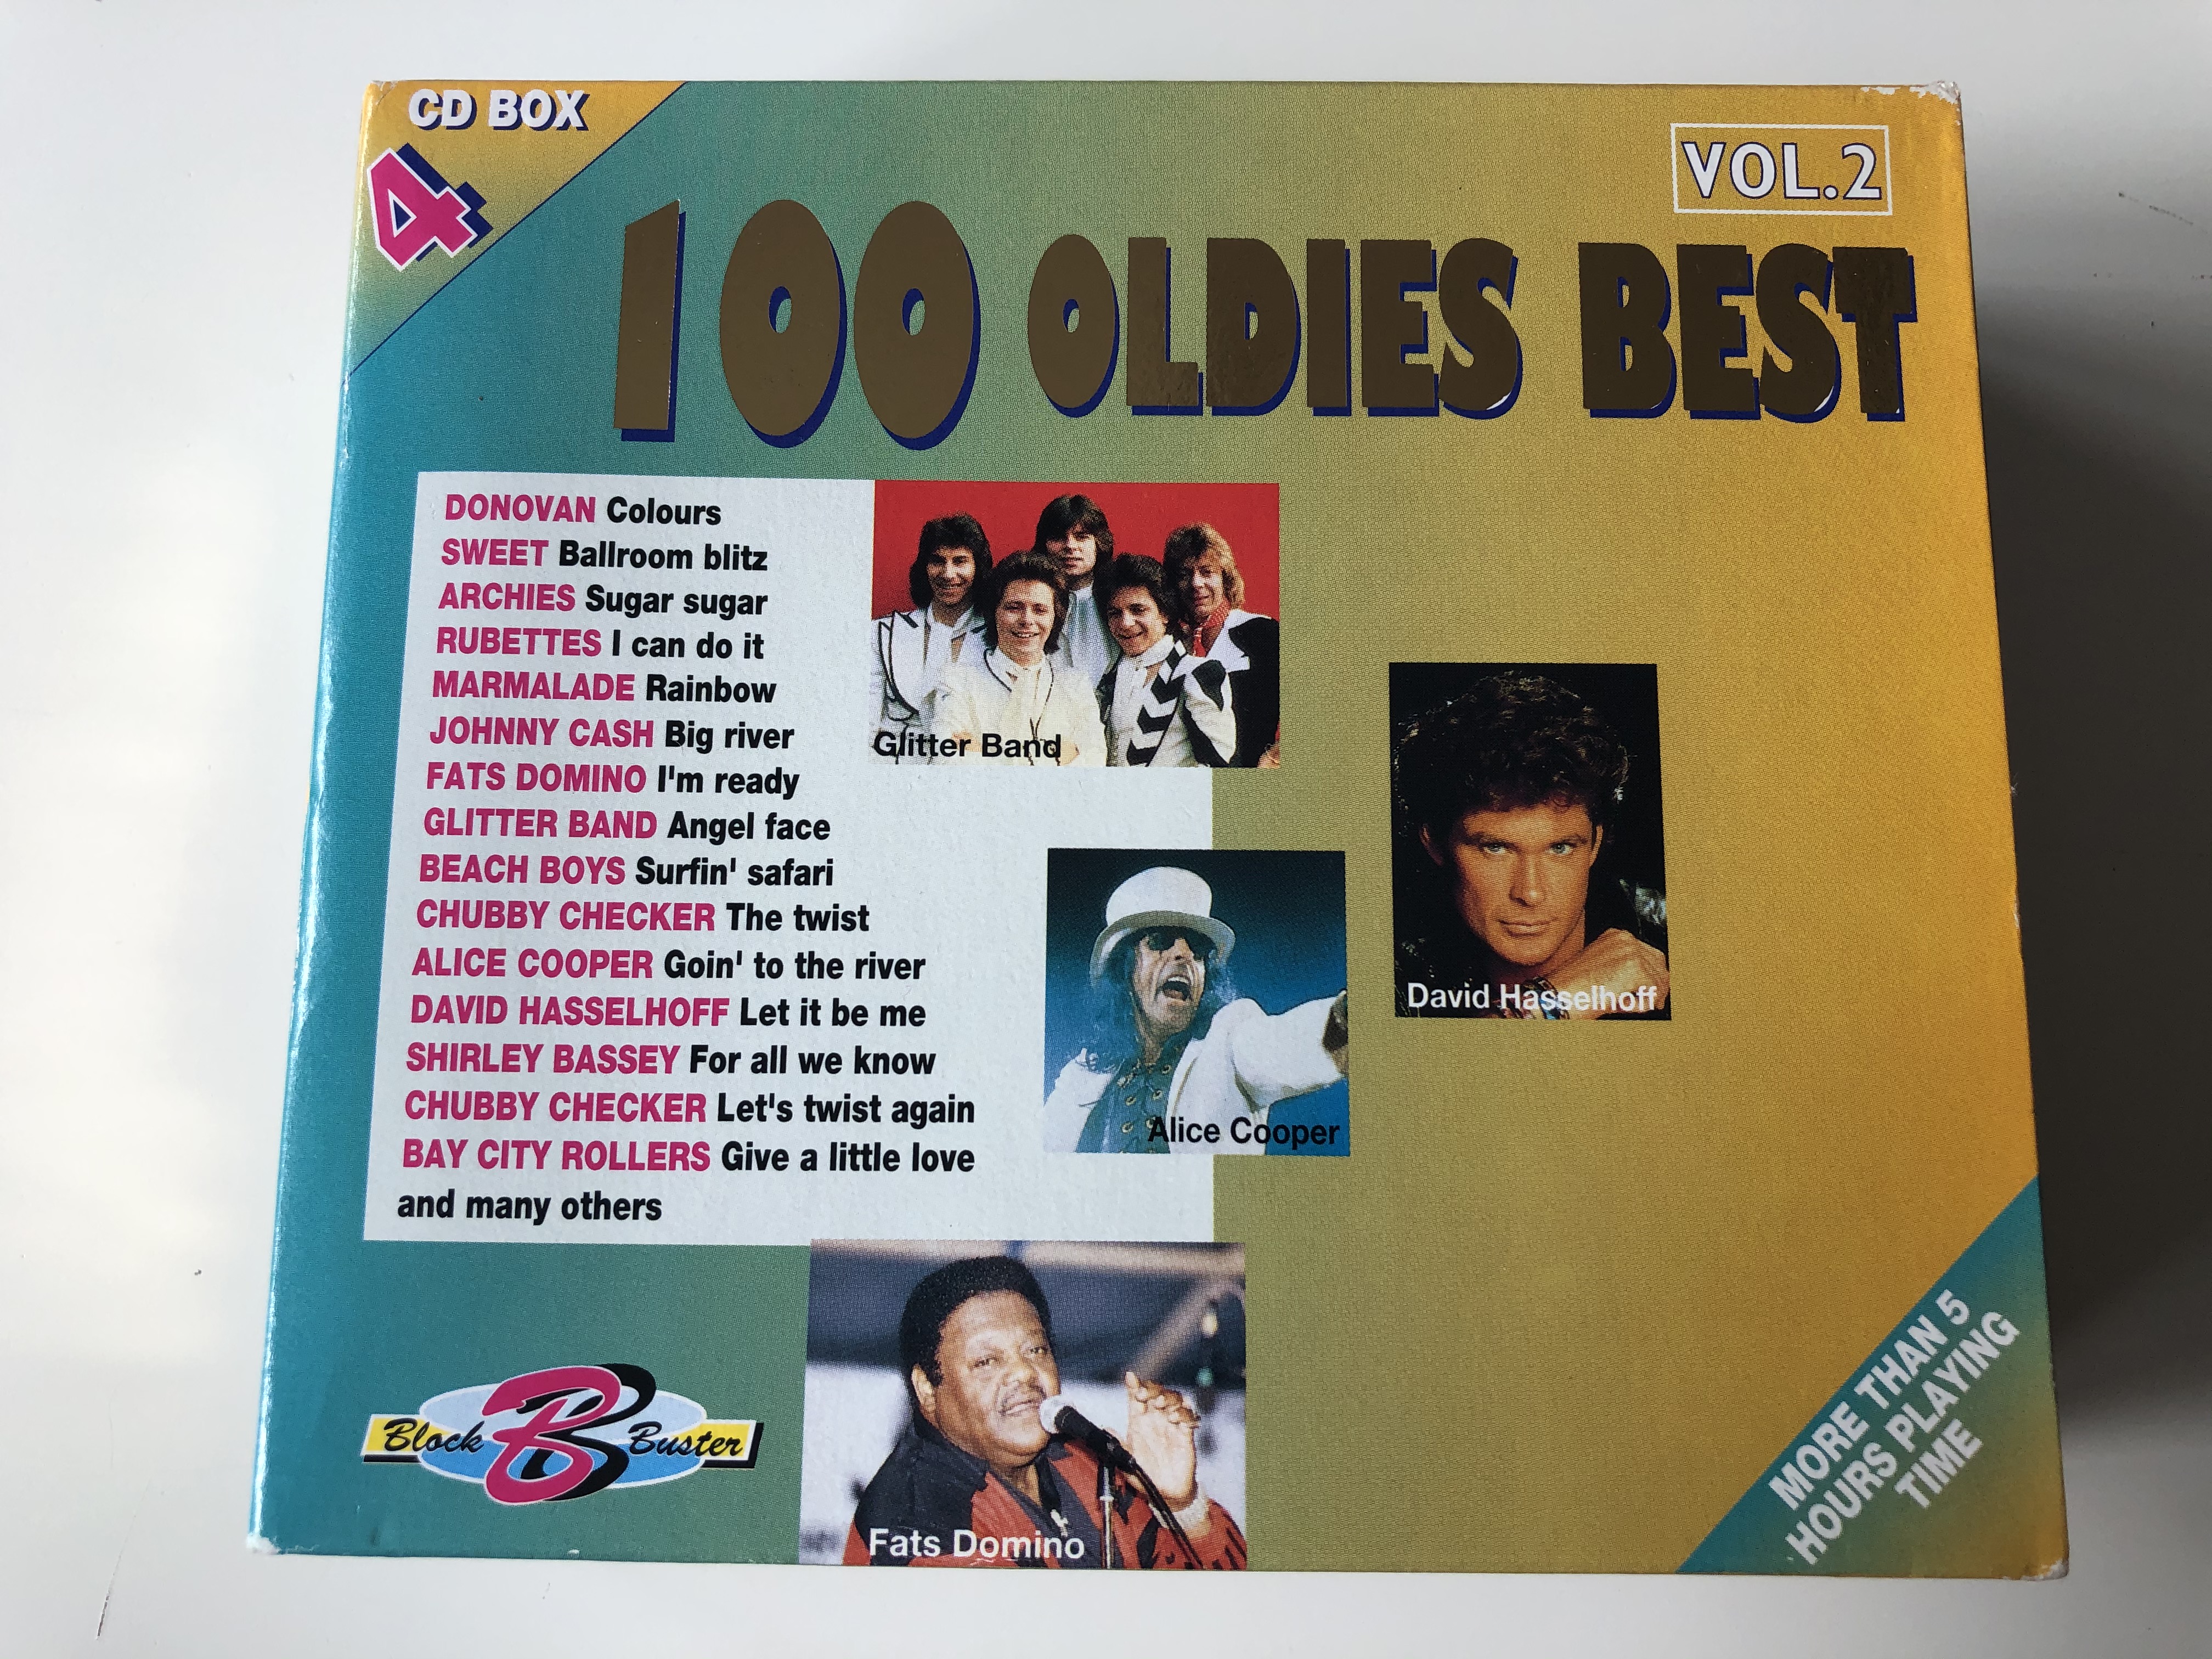 100-oldies-best-vol.-2-cd-box-4-donovan-colours-sweet-ballroom-blitz-archies-sugar-sugar-rubettes-i-can-do-it-marmalade-rainbow-johnny-cash-big-river-and-many-others-select-1-.jpg